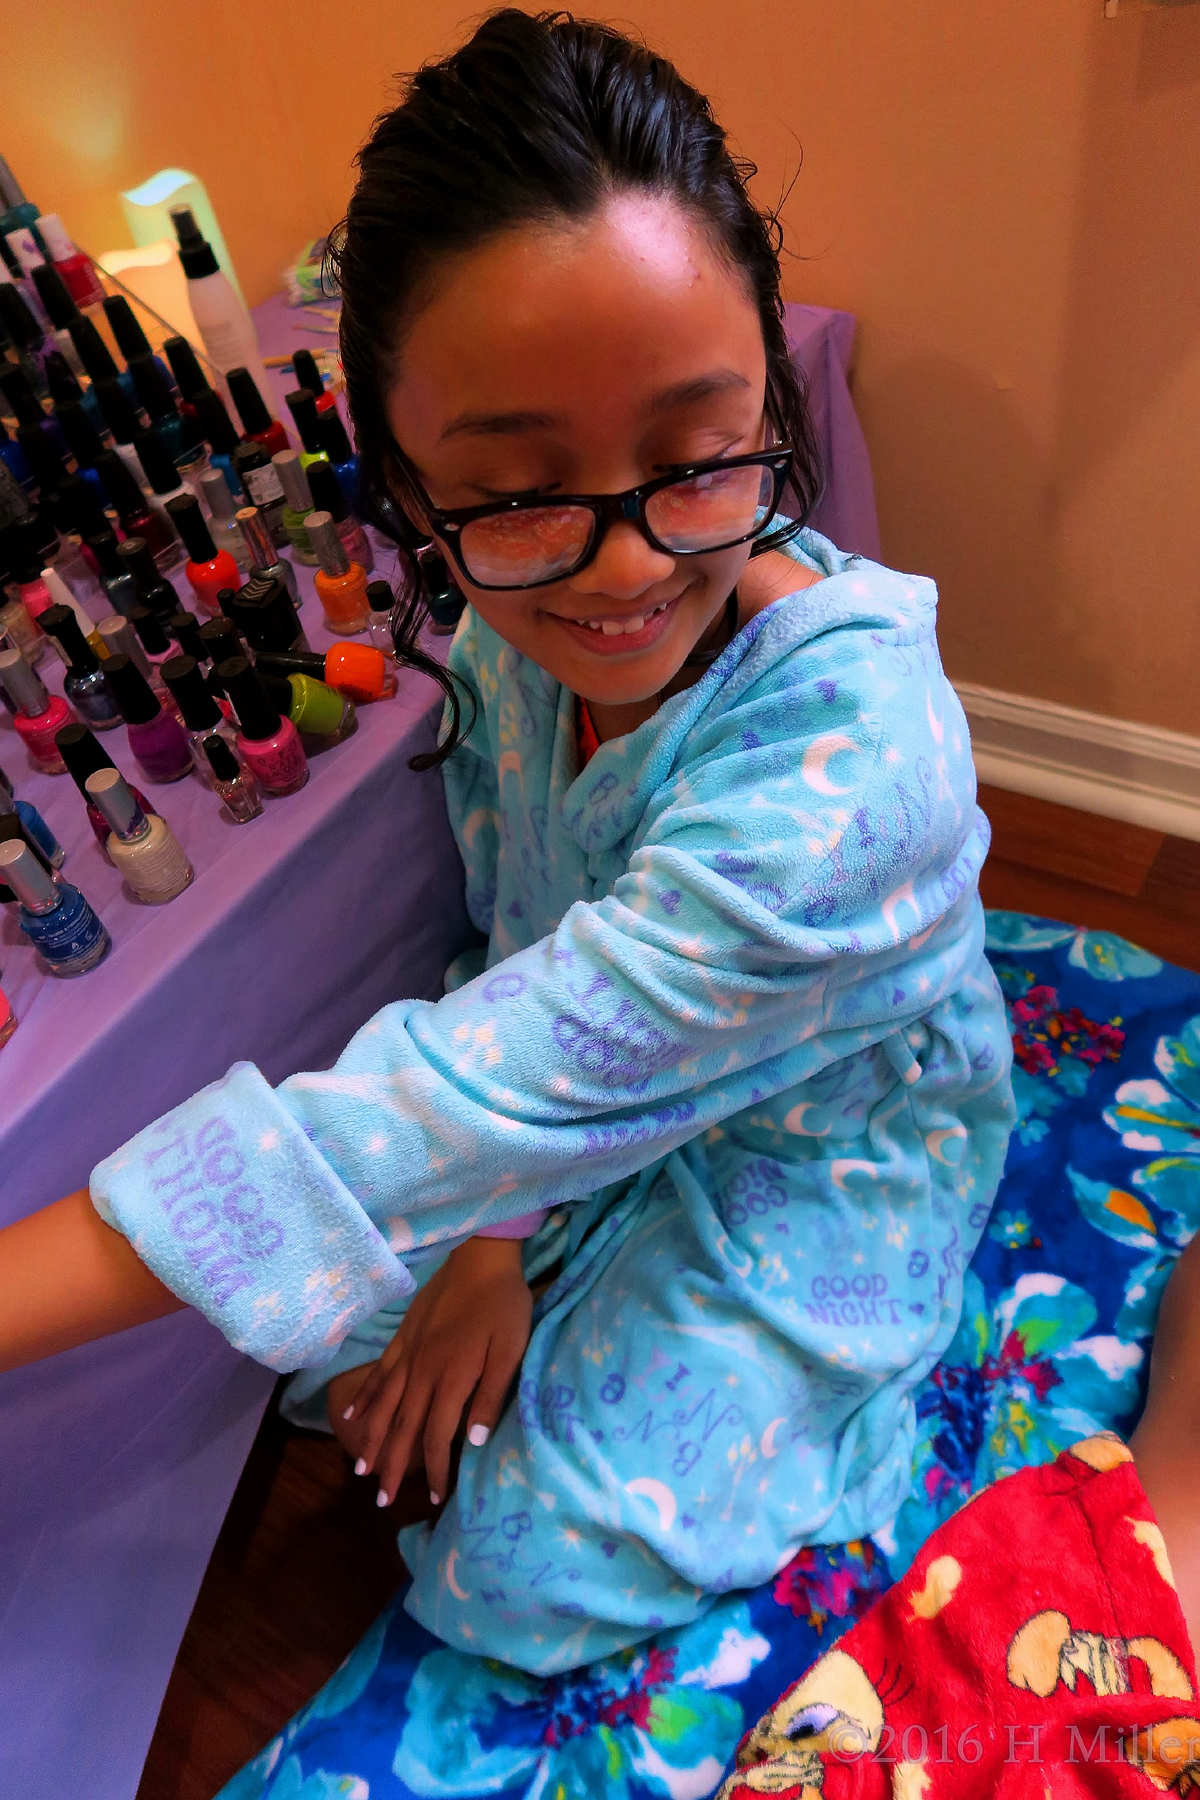 Smiling And Getting Her Nails Done In The Kids Home Spa 